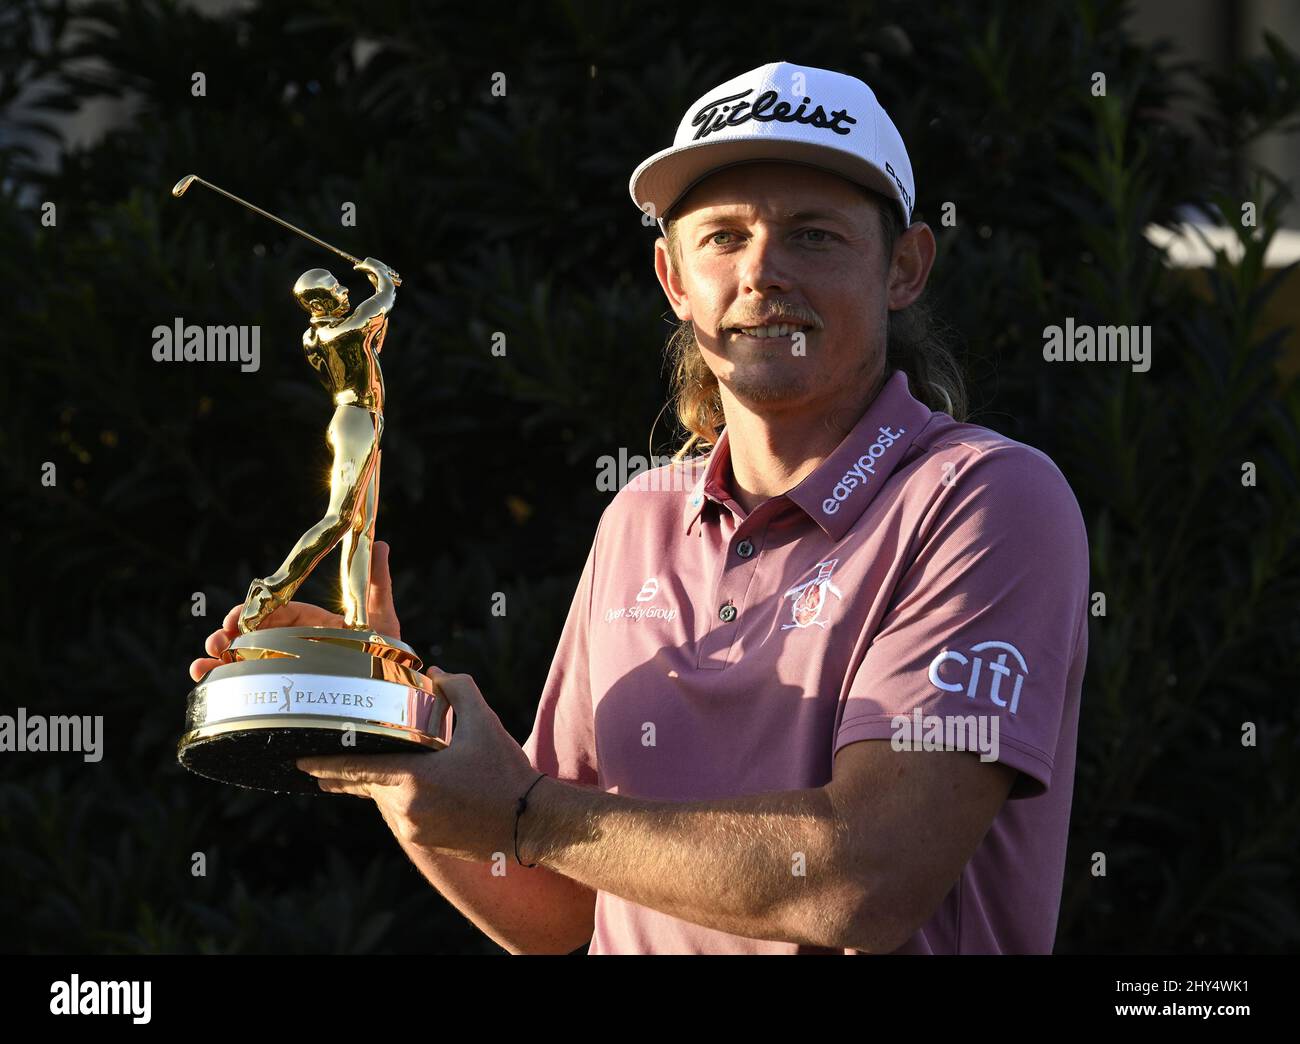 Ponte Vedra Beach, United States. 14th Mar, 2022. Cameron Smith of Australia holds the Gold Man 2022 Players Championship trophy after the final round and winning the 2022 Players PGA Championship on the Stadium Course at TPC Sawgrass in Ponte Vedra Beach, Florida on Monday, March 14, 2022. Smith won the championship with a score of 6 under par. Photo by Joe Marino/UPI Credit: UPI/Alamy Live News Stock Photo